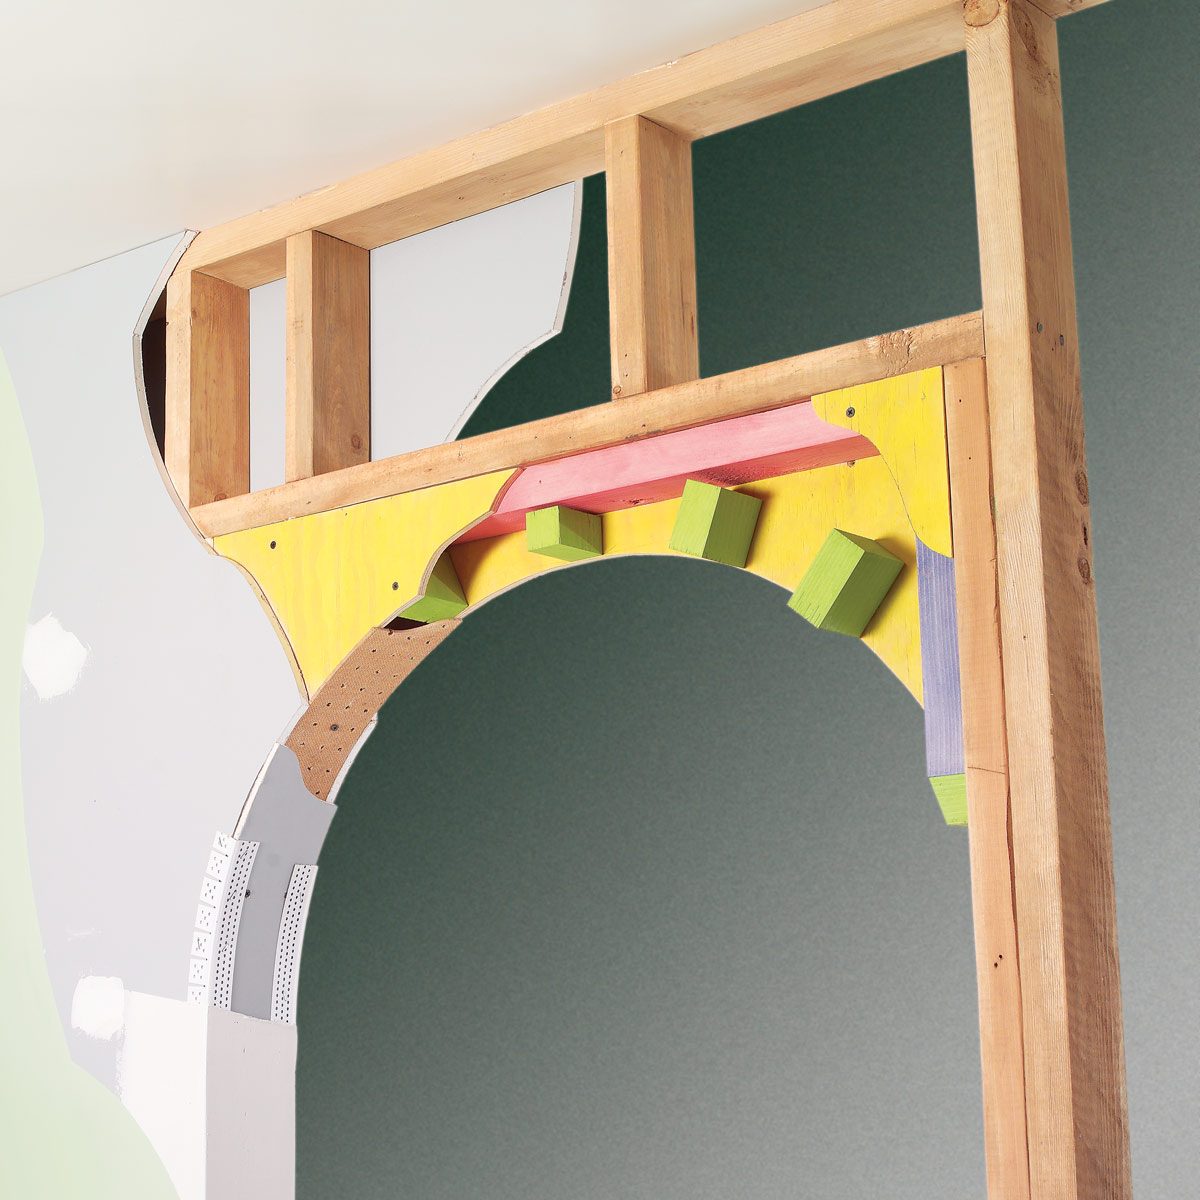 How to Make a Doorway Into an Arch